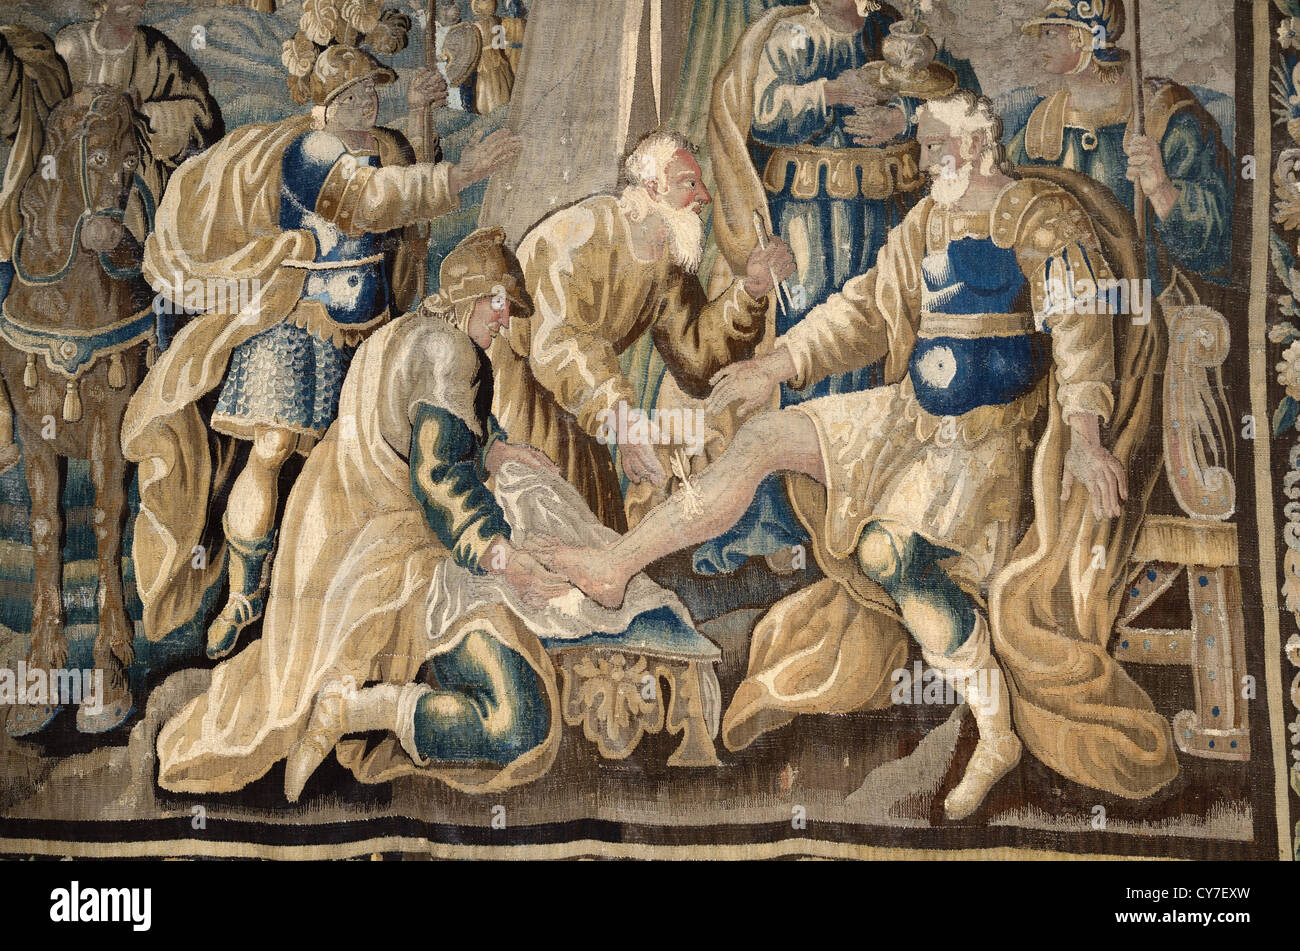 Godfrey of Bouillon, ruler of Jerusalem, Injured by Arrow during the 1st Crusade on c17th Aubusson Tapestry Stock Photo